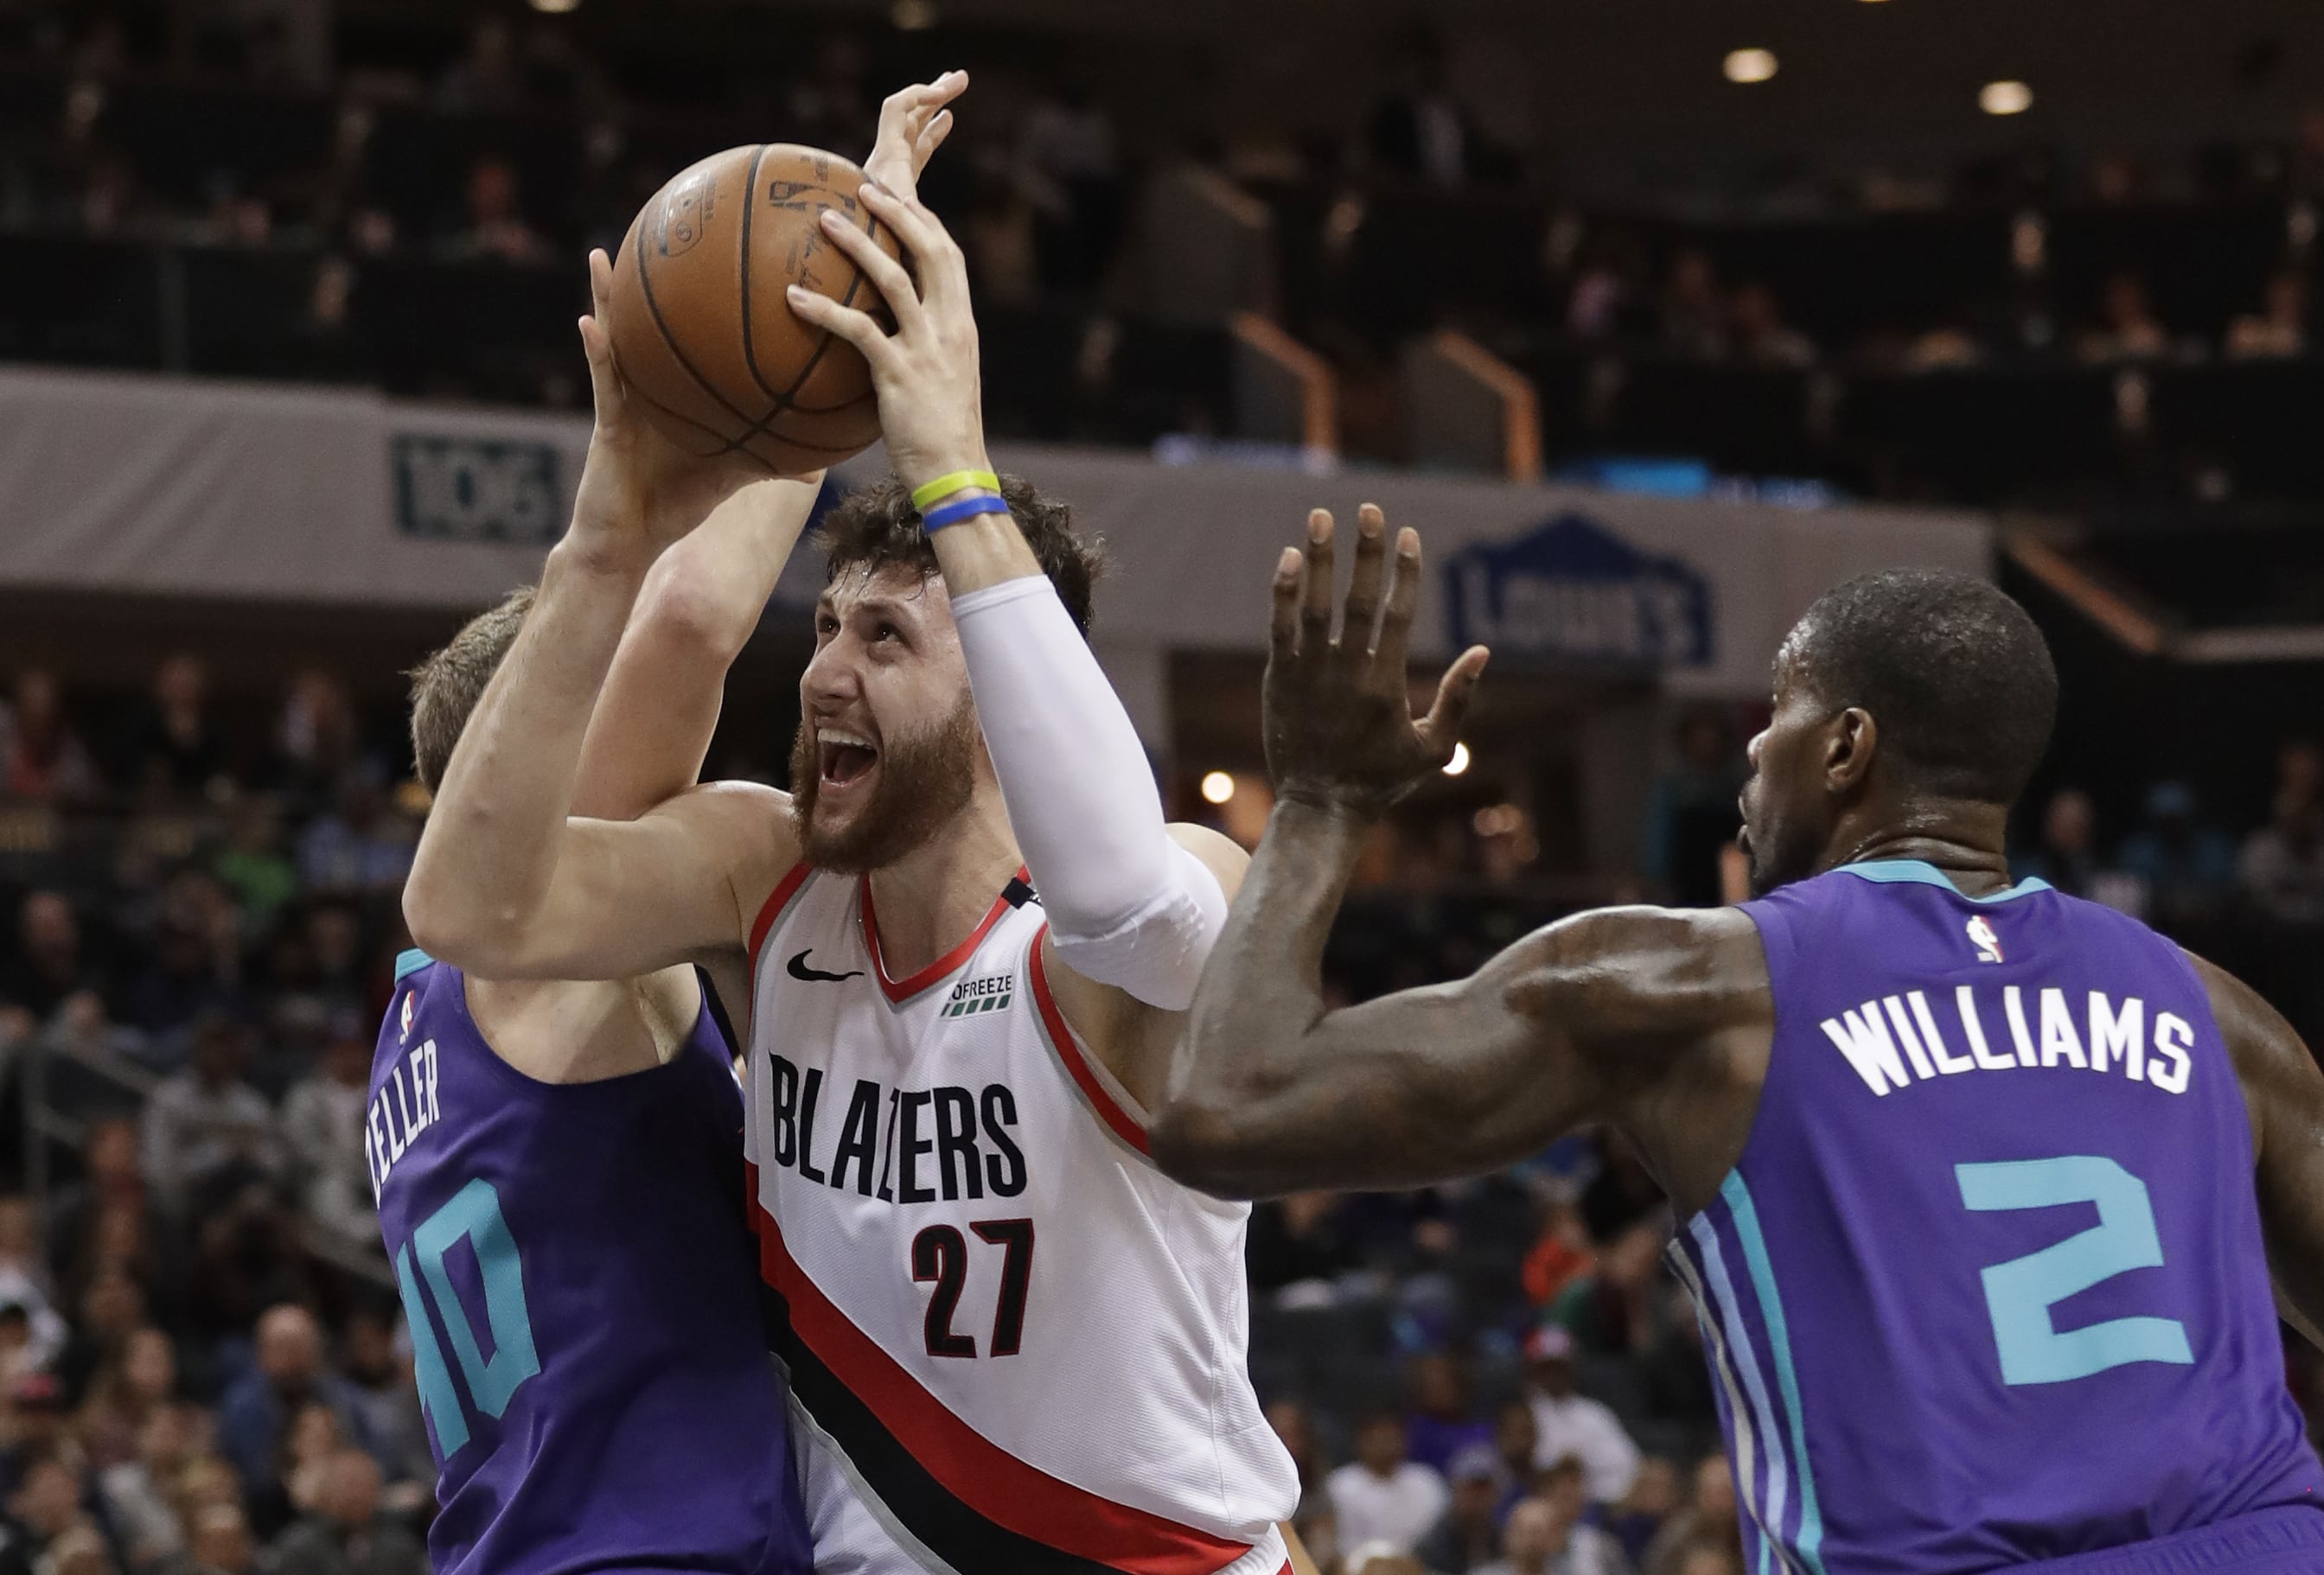 Portland Trail Blazers' Jusuf Nurkic (27) drives between Charlotte Hornets' Marvin Williams (2) and Cody Zeller (40) during the first half of an NBA basketball game in Charlotte, N.C., Sunday, March 3, 2019.